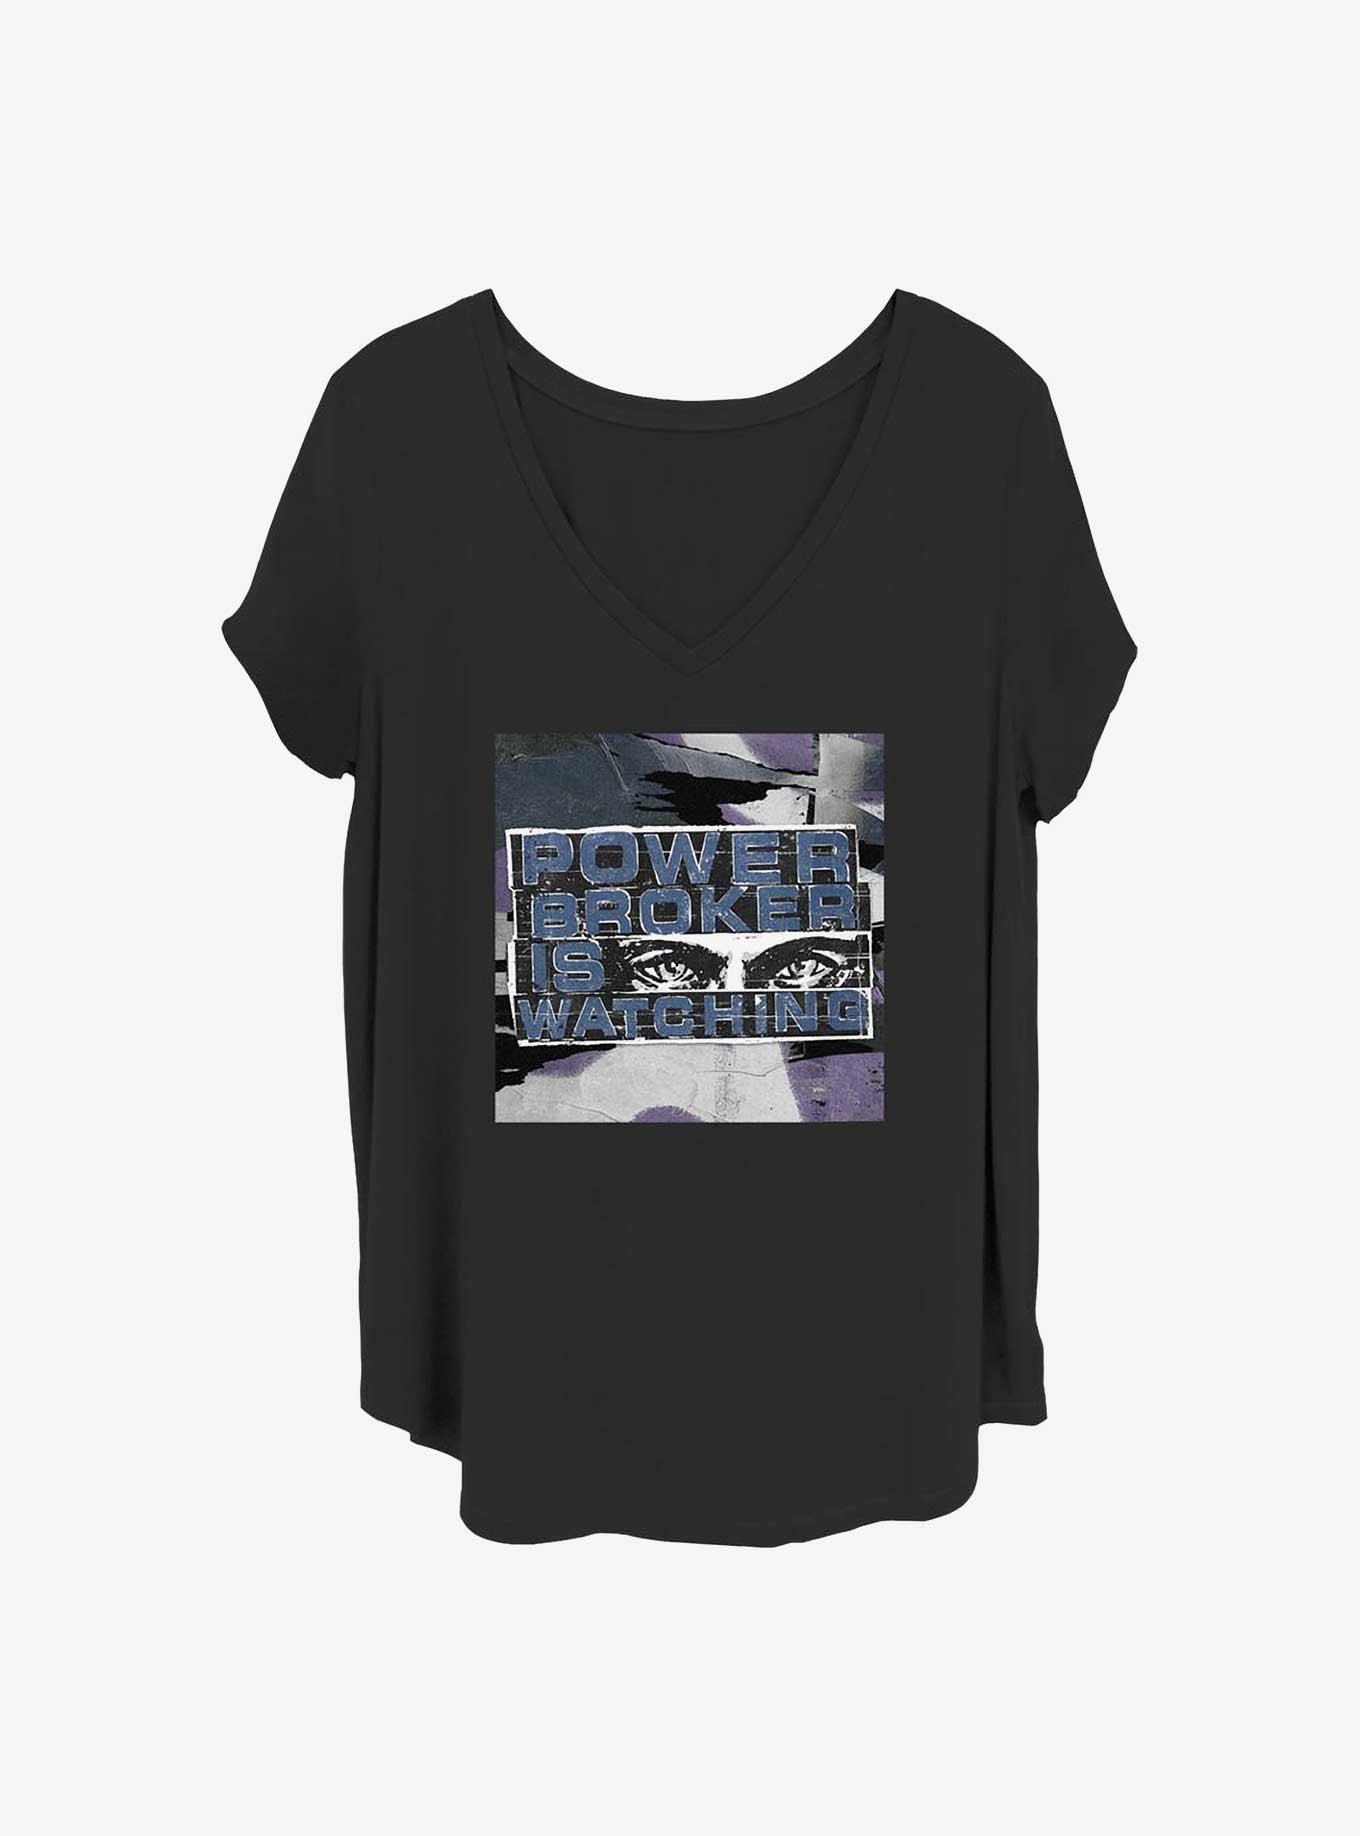 Marvel The Falcon and the Winter Soldier Watching Girls T-Shirt Plus Size, BLACK, hi-res